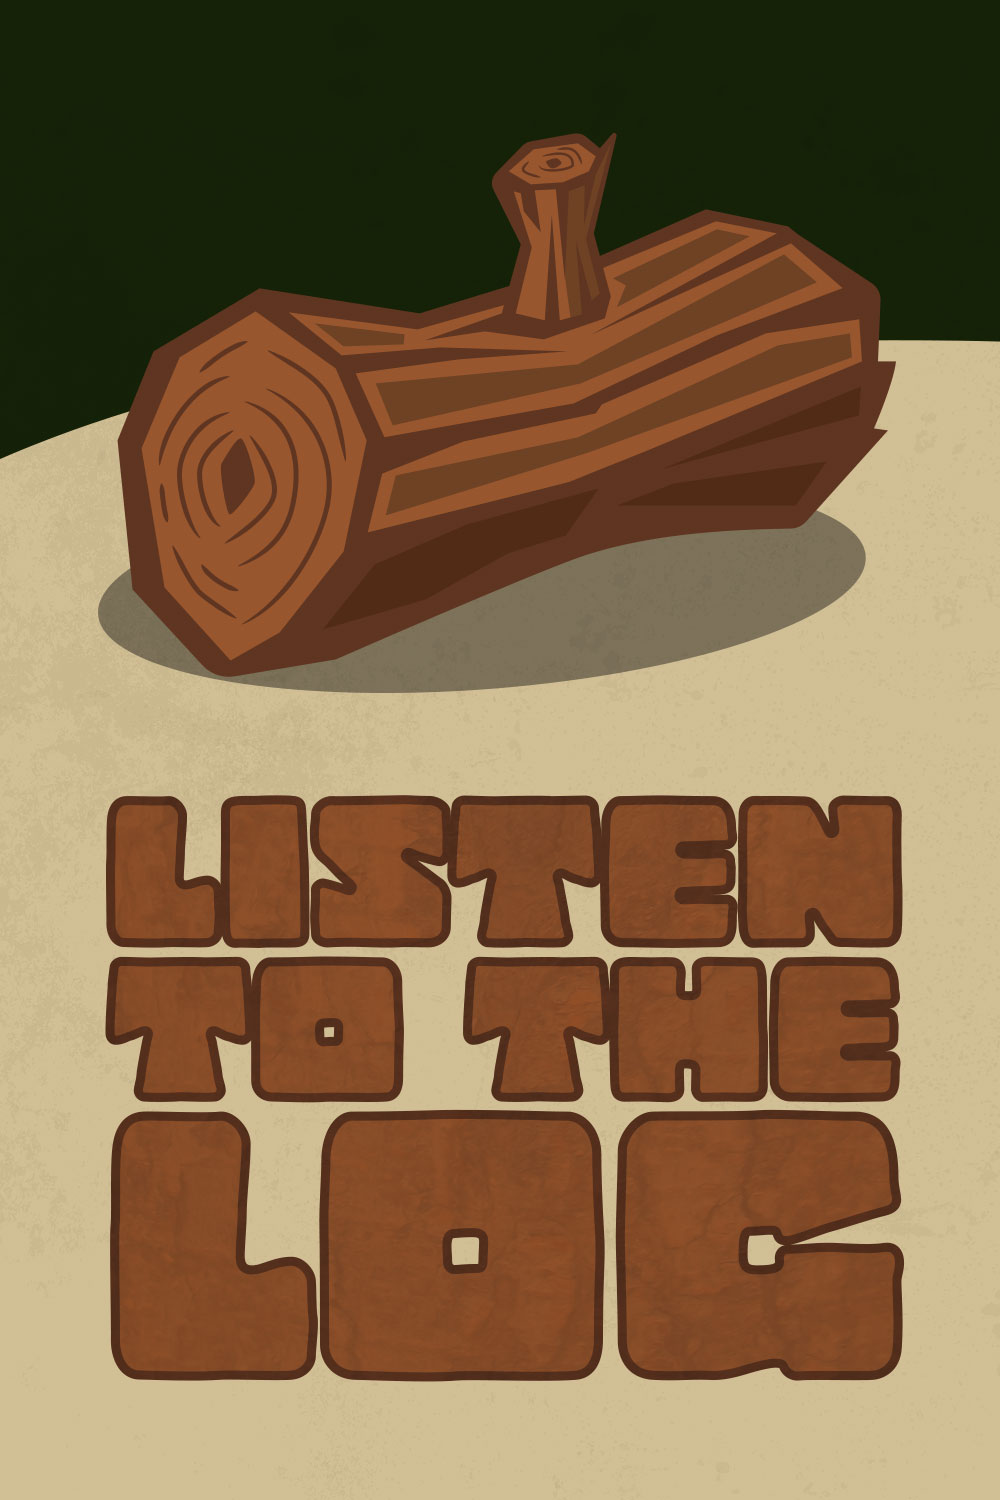 An illustration of a log with the caption Listen to the Log